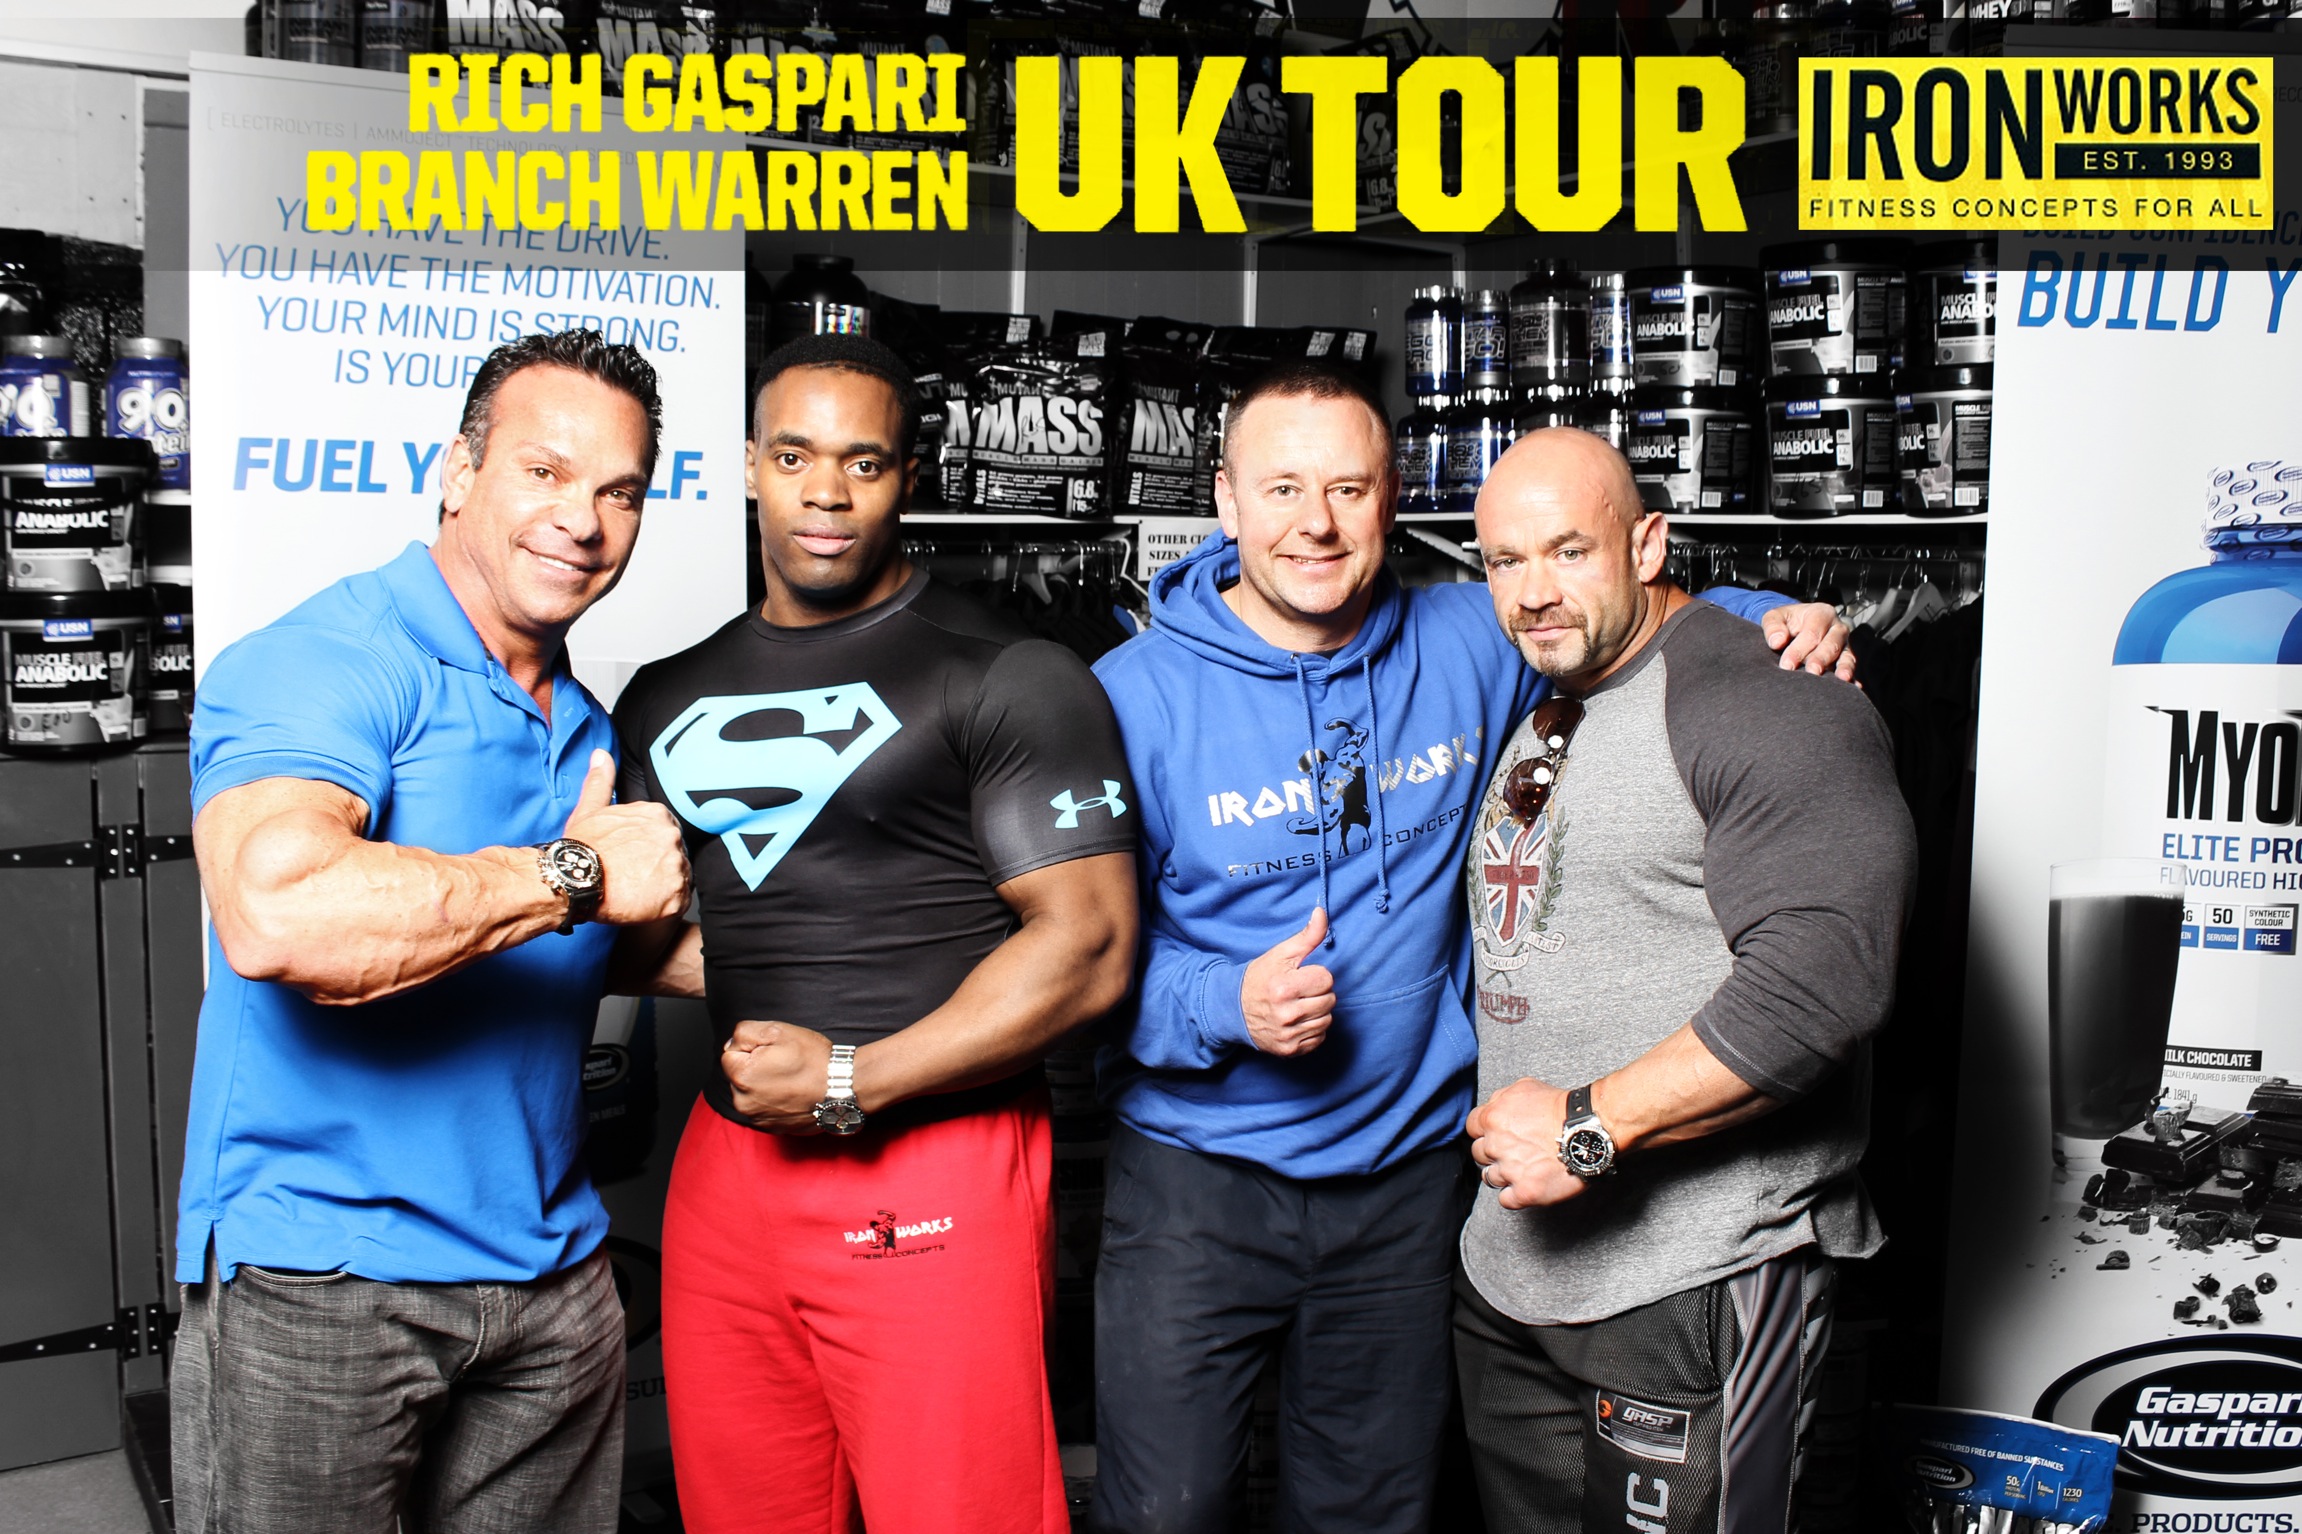 Bodypower Weekend at the Iron Works